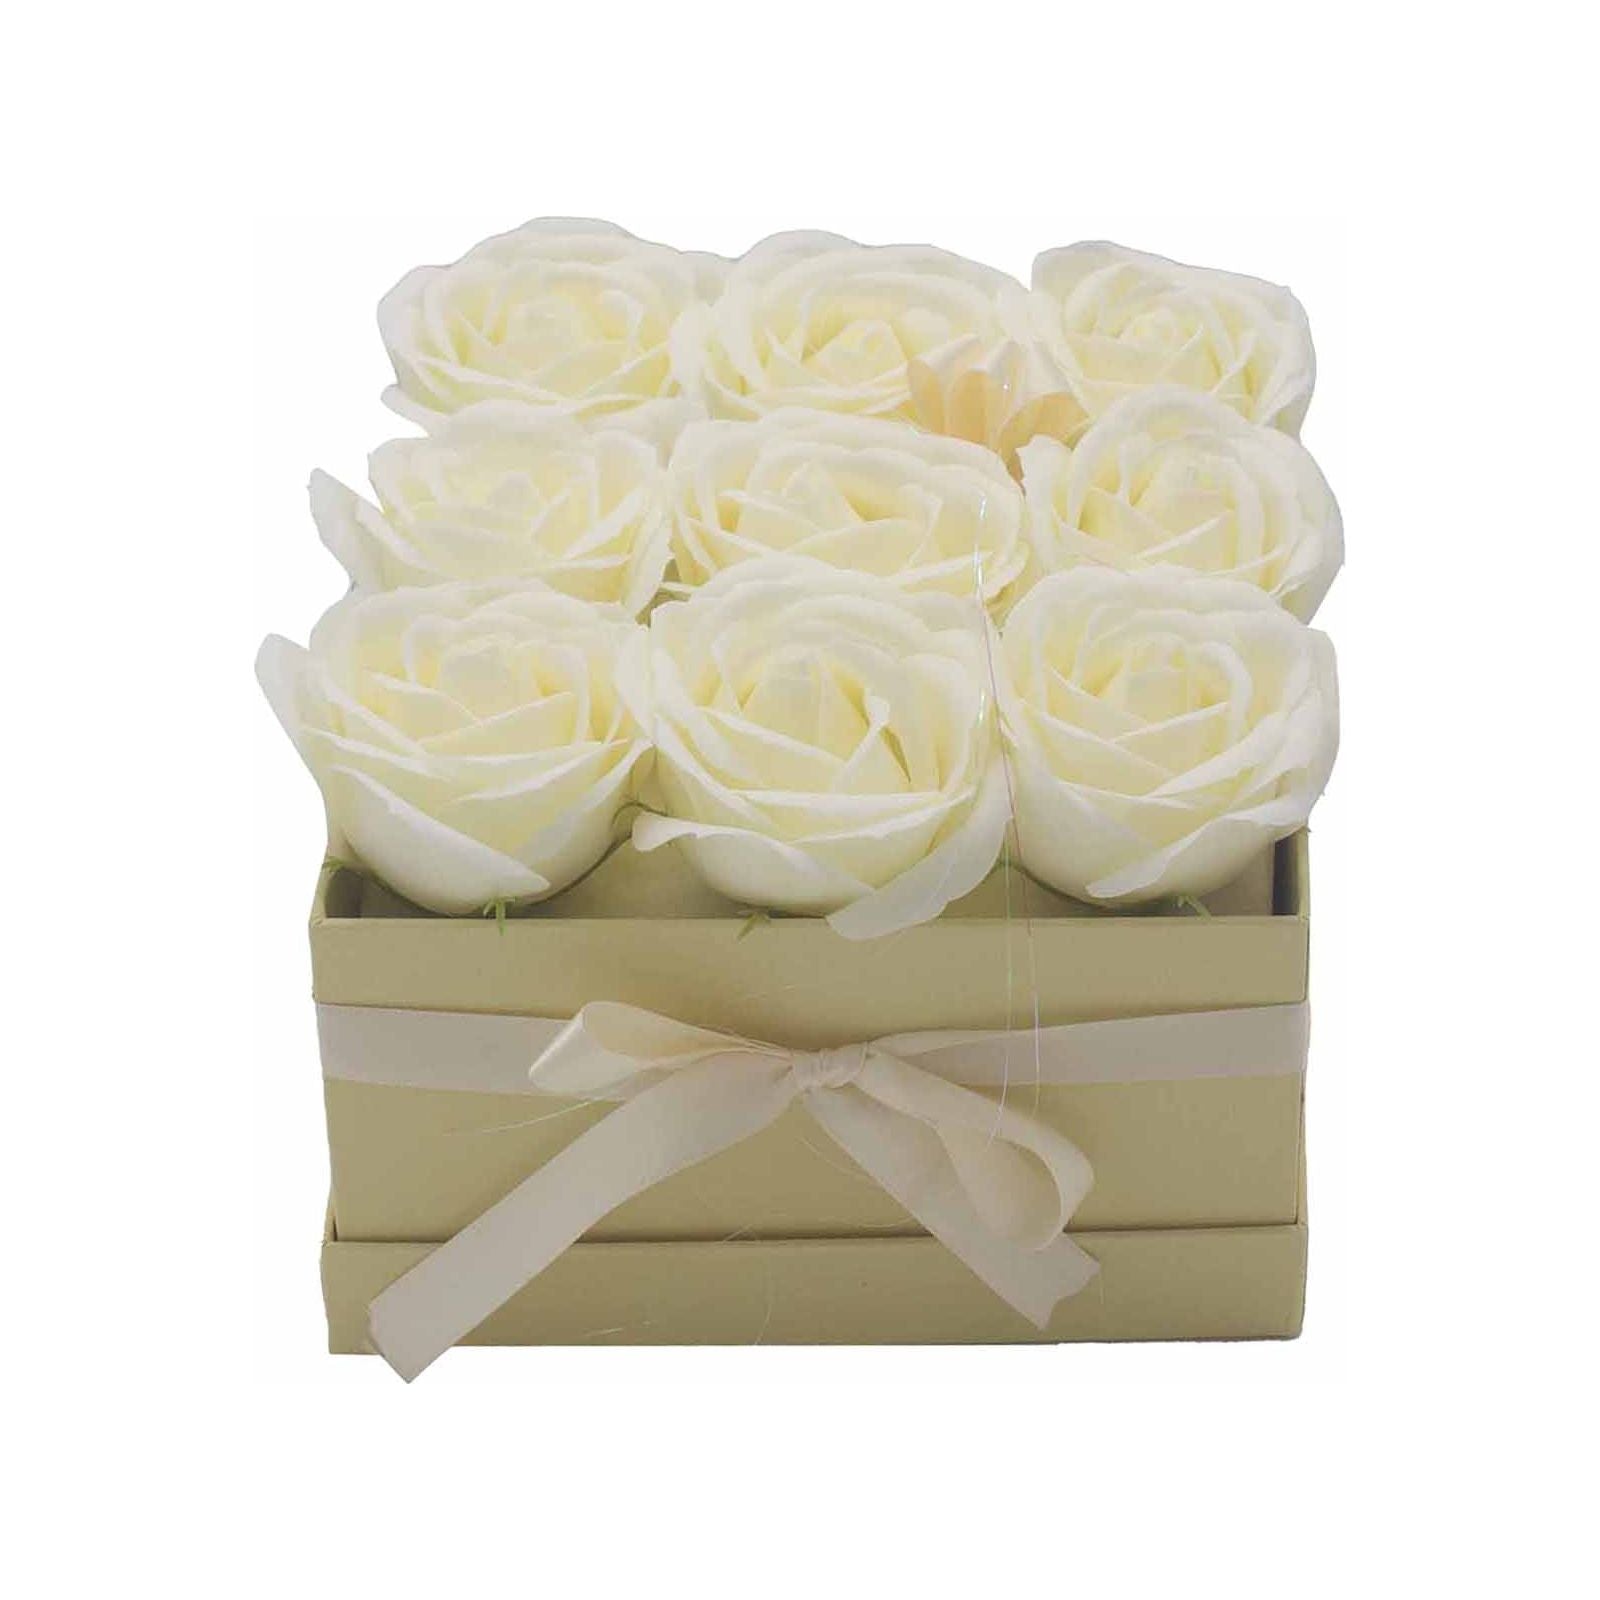 Soap Flower Gift Bouquet - 9 Cream Roses - Square - Ashton and Finch